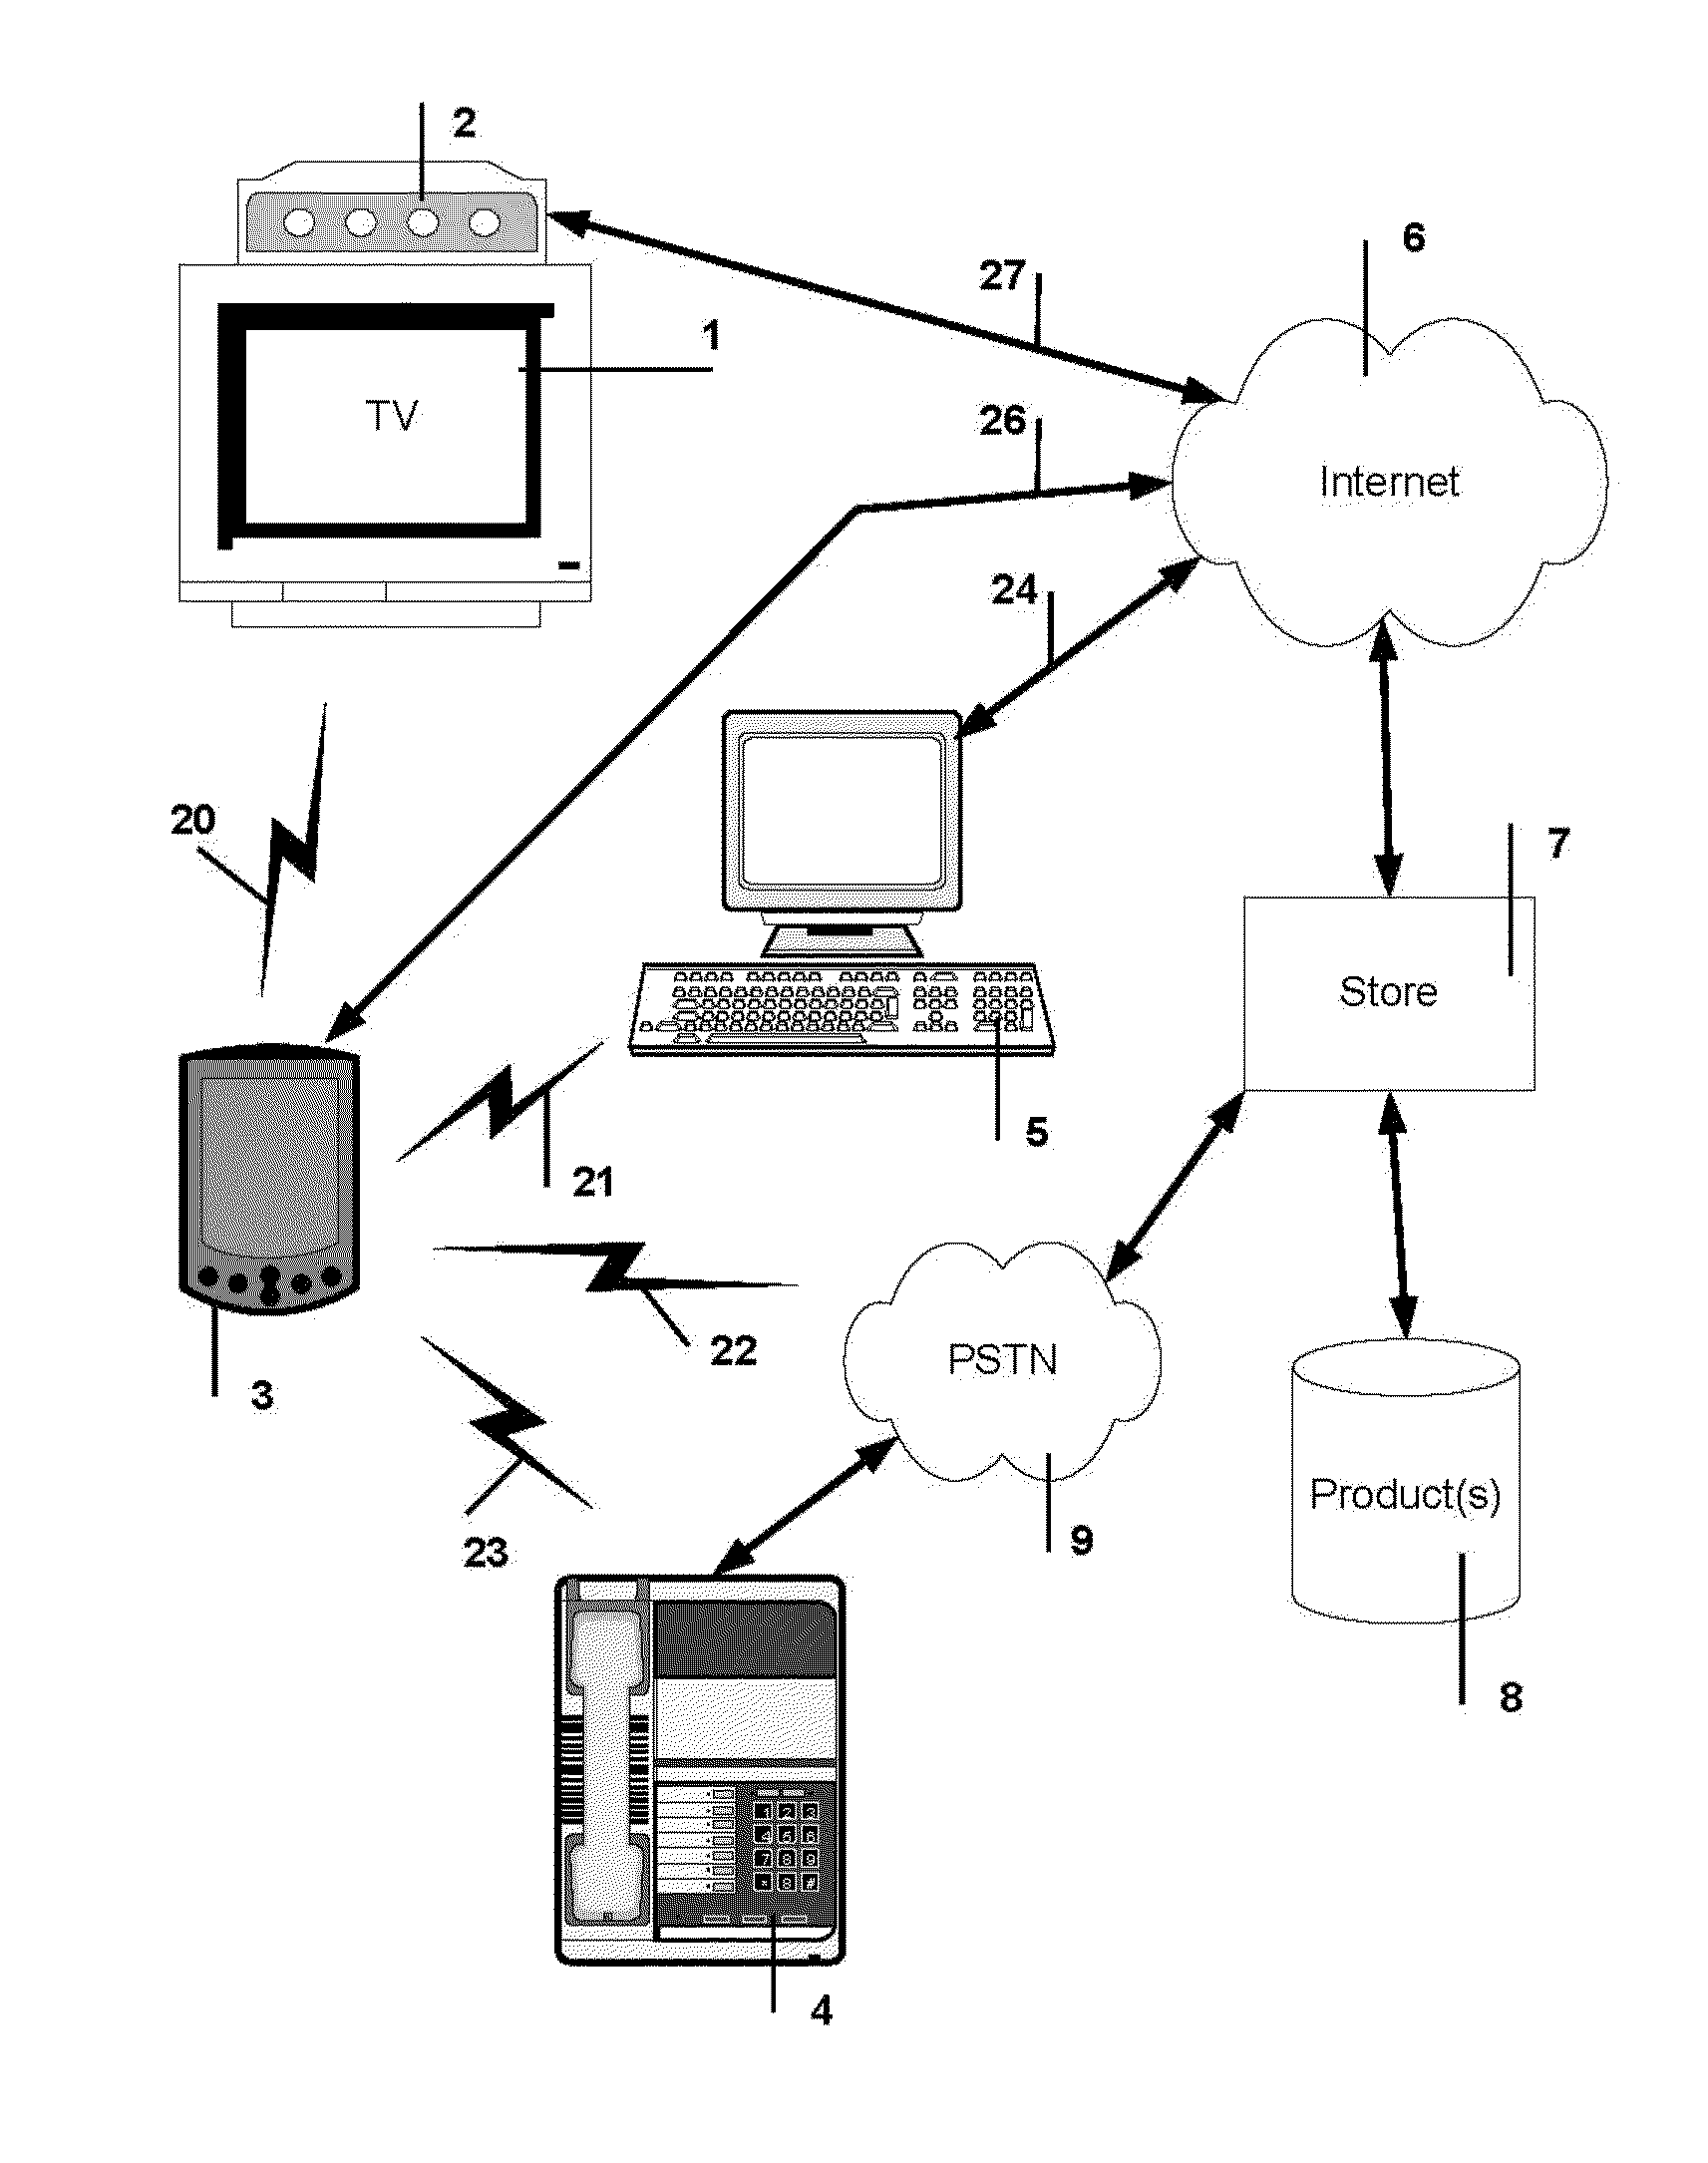 Television System To Extract Television Product Placement Advertisement Data And To Store Data In a Remote Control Device